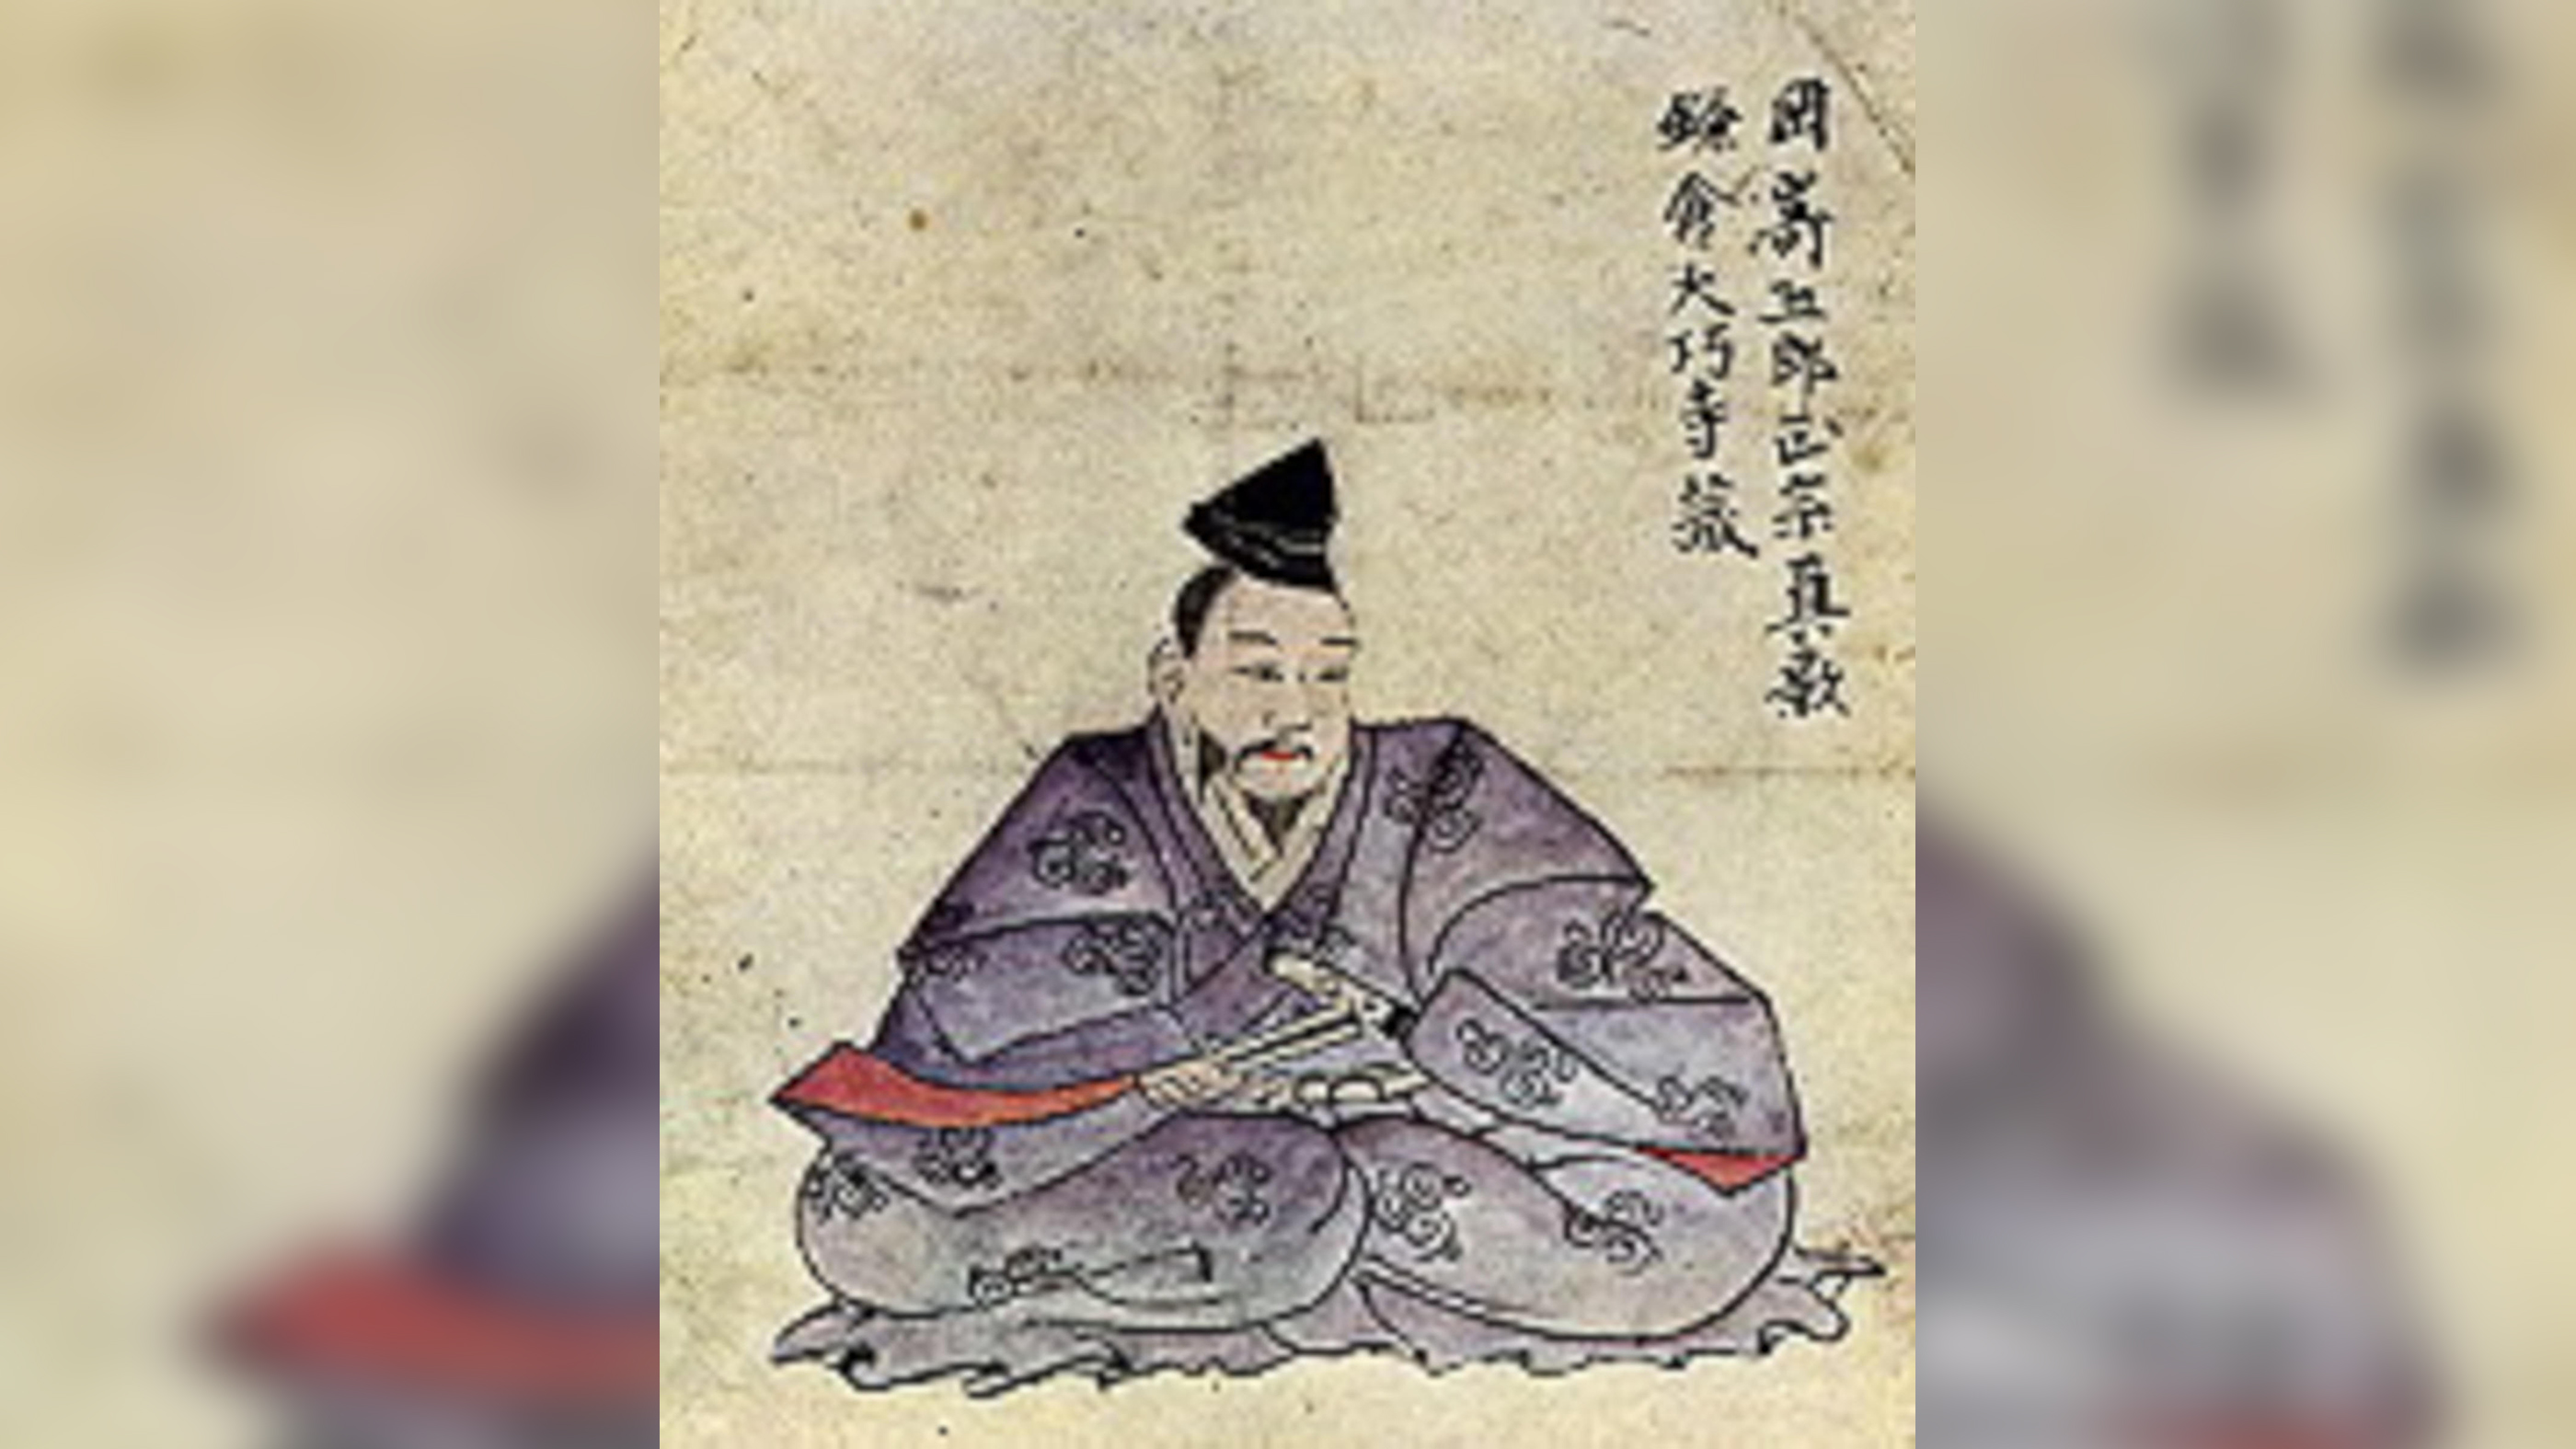 This old portrait depicts the swordsmith Masamune.